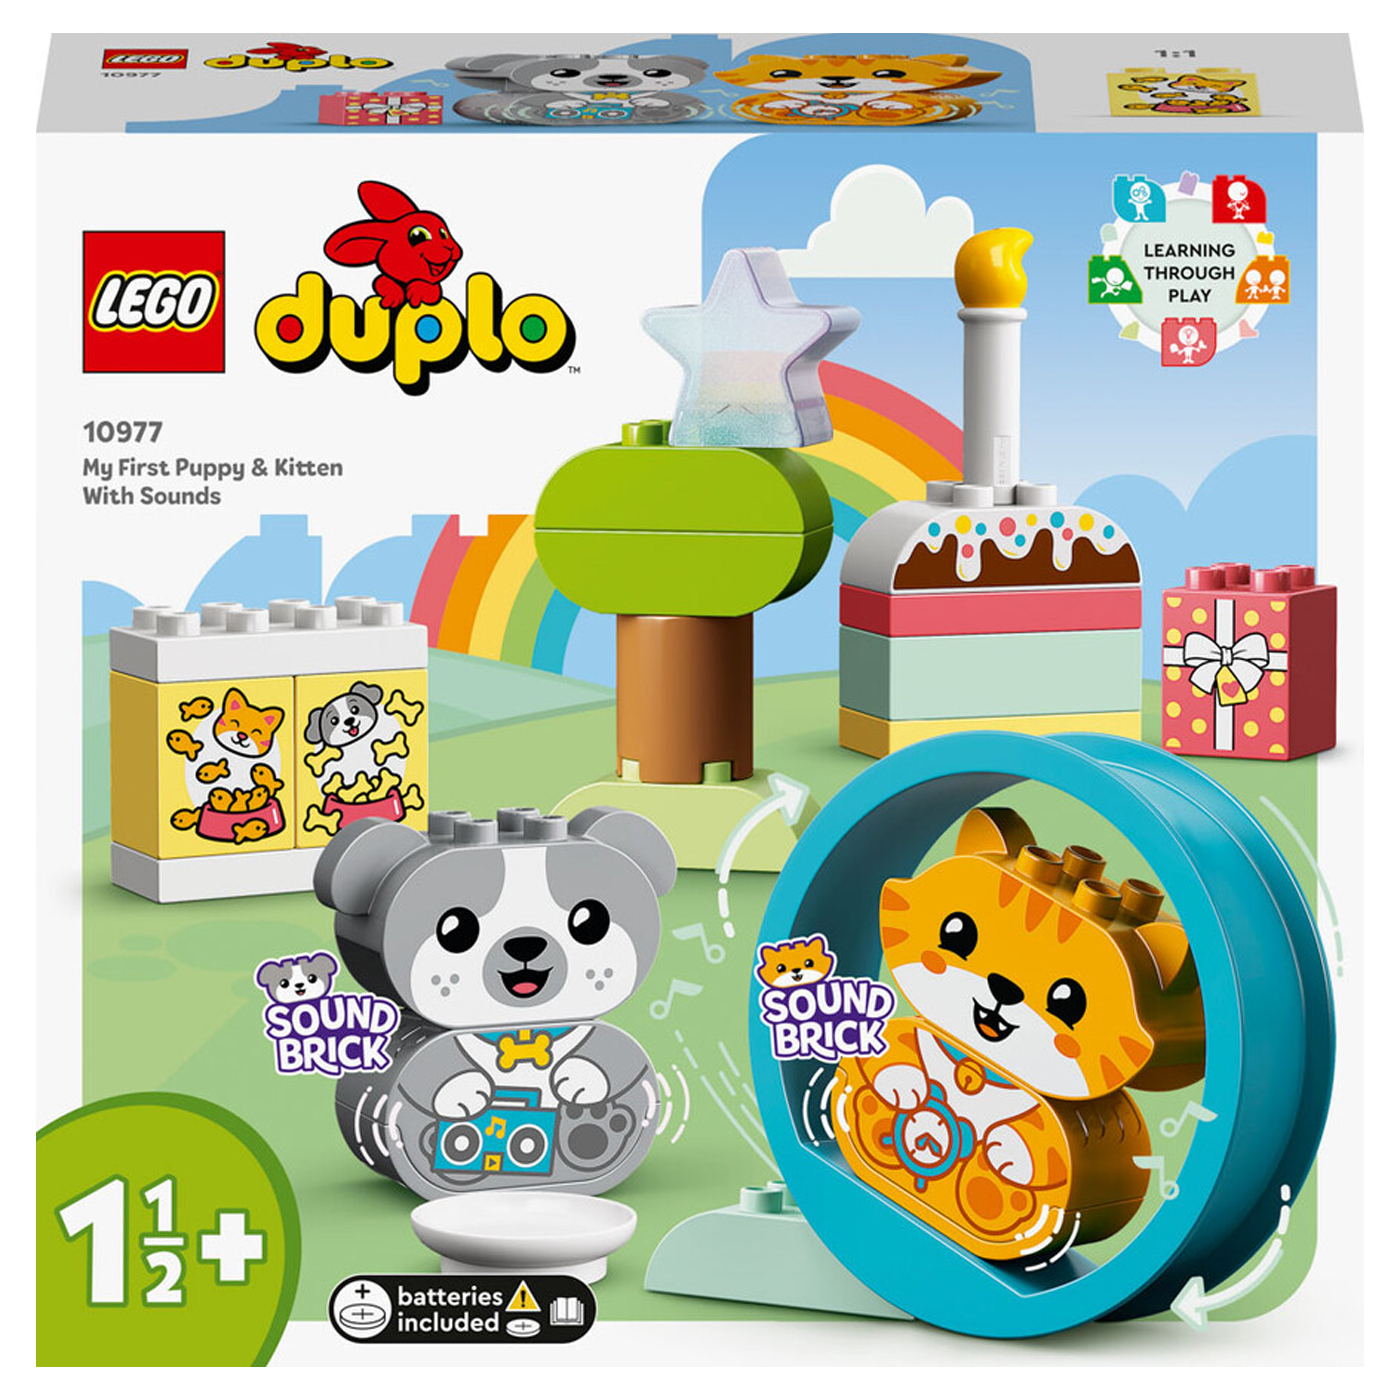  Lego Duplo Puppy And Kitten Sounds